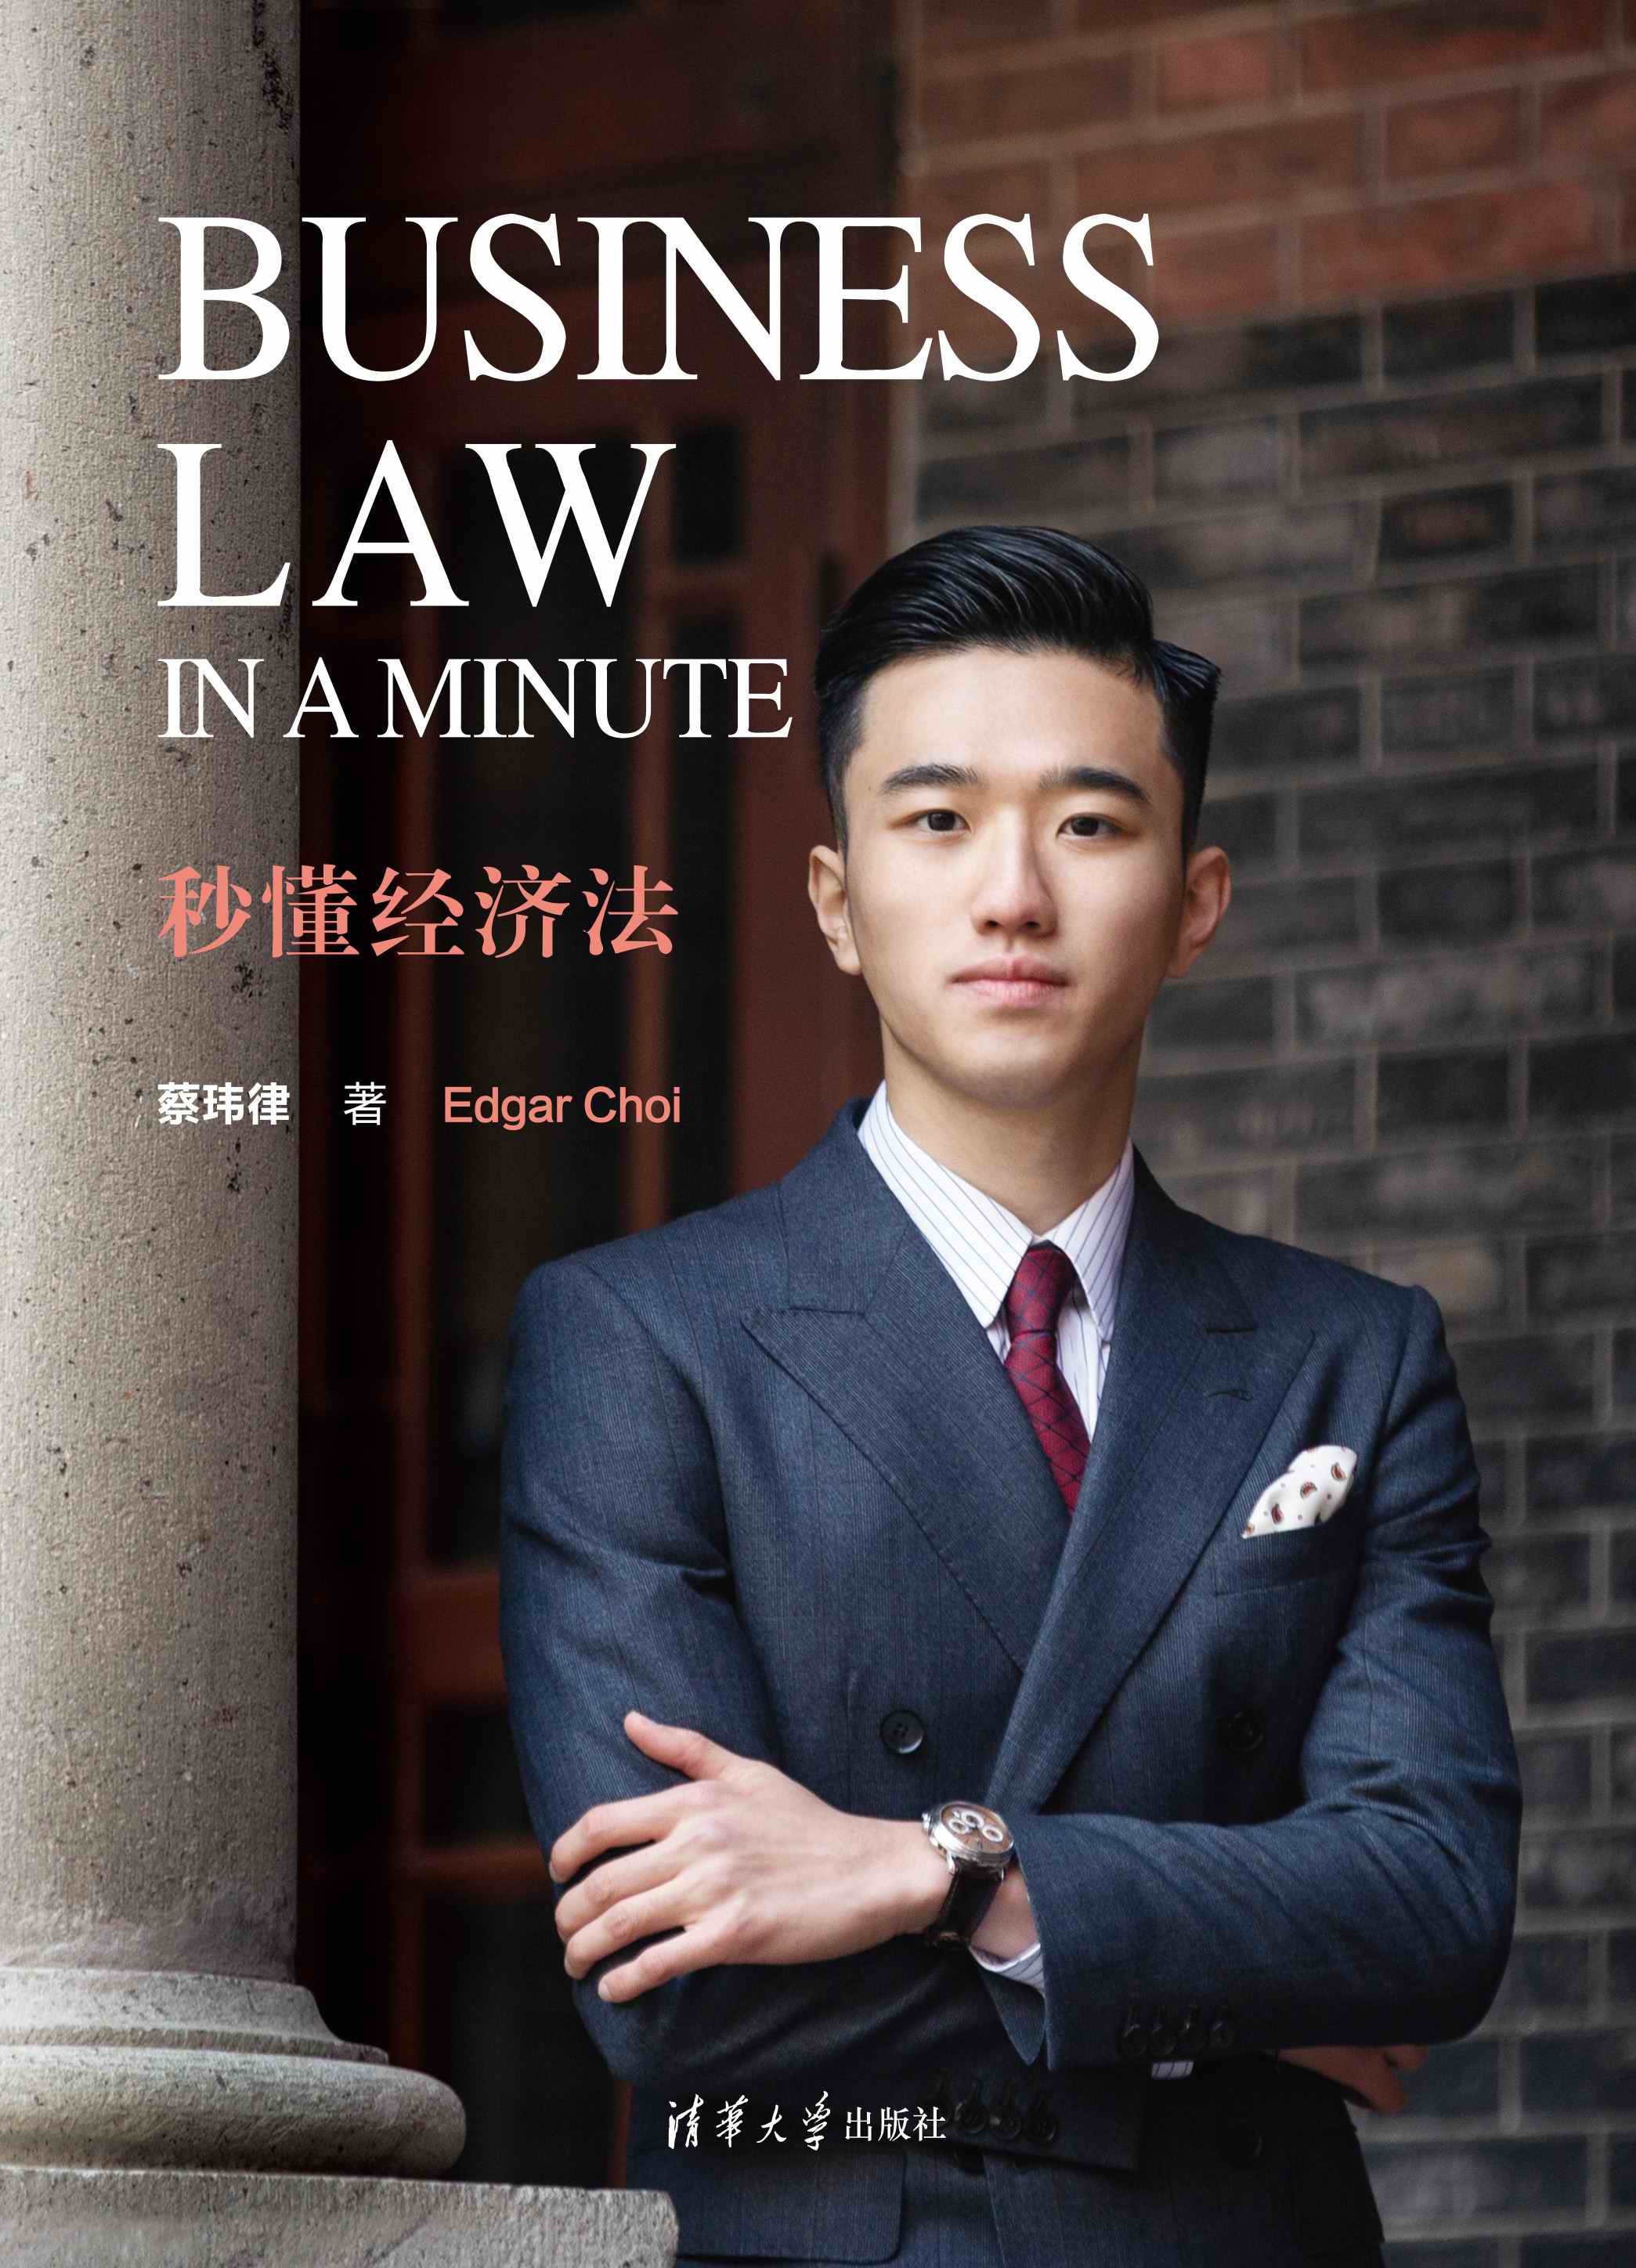 Business Law in a Minute 秒懂经济法